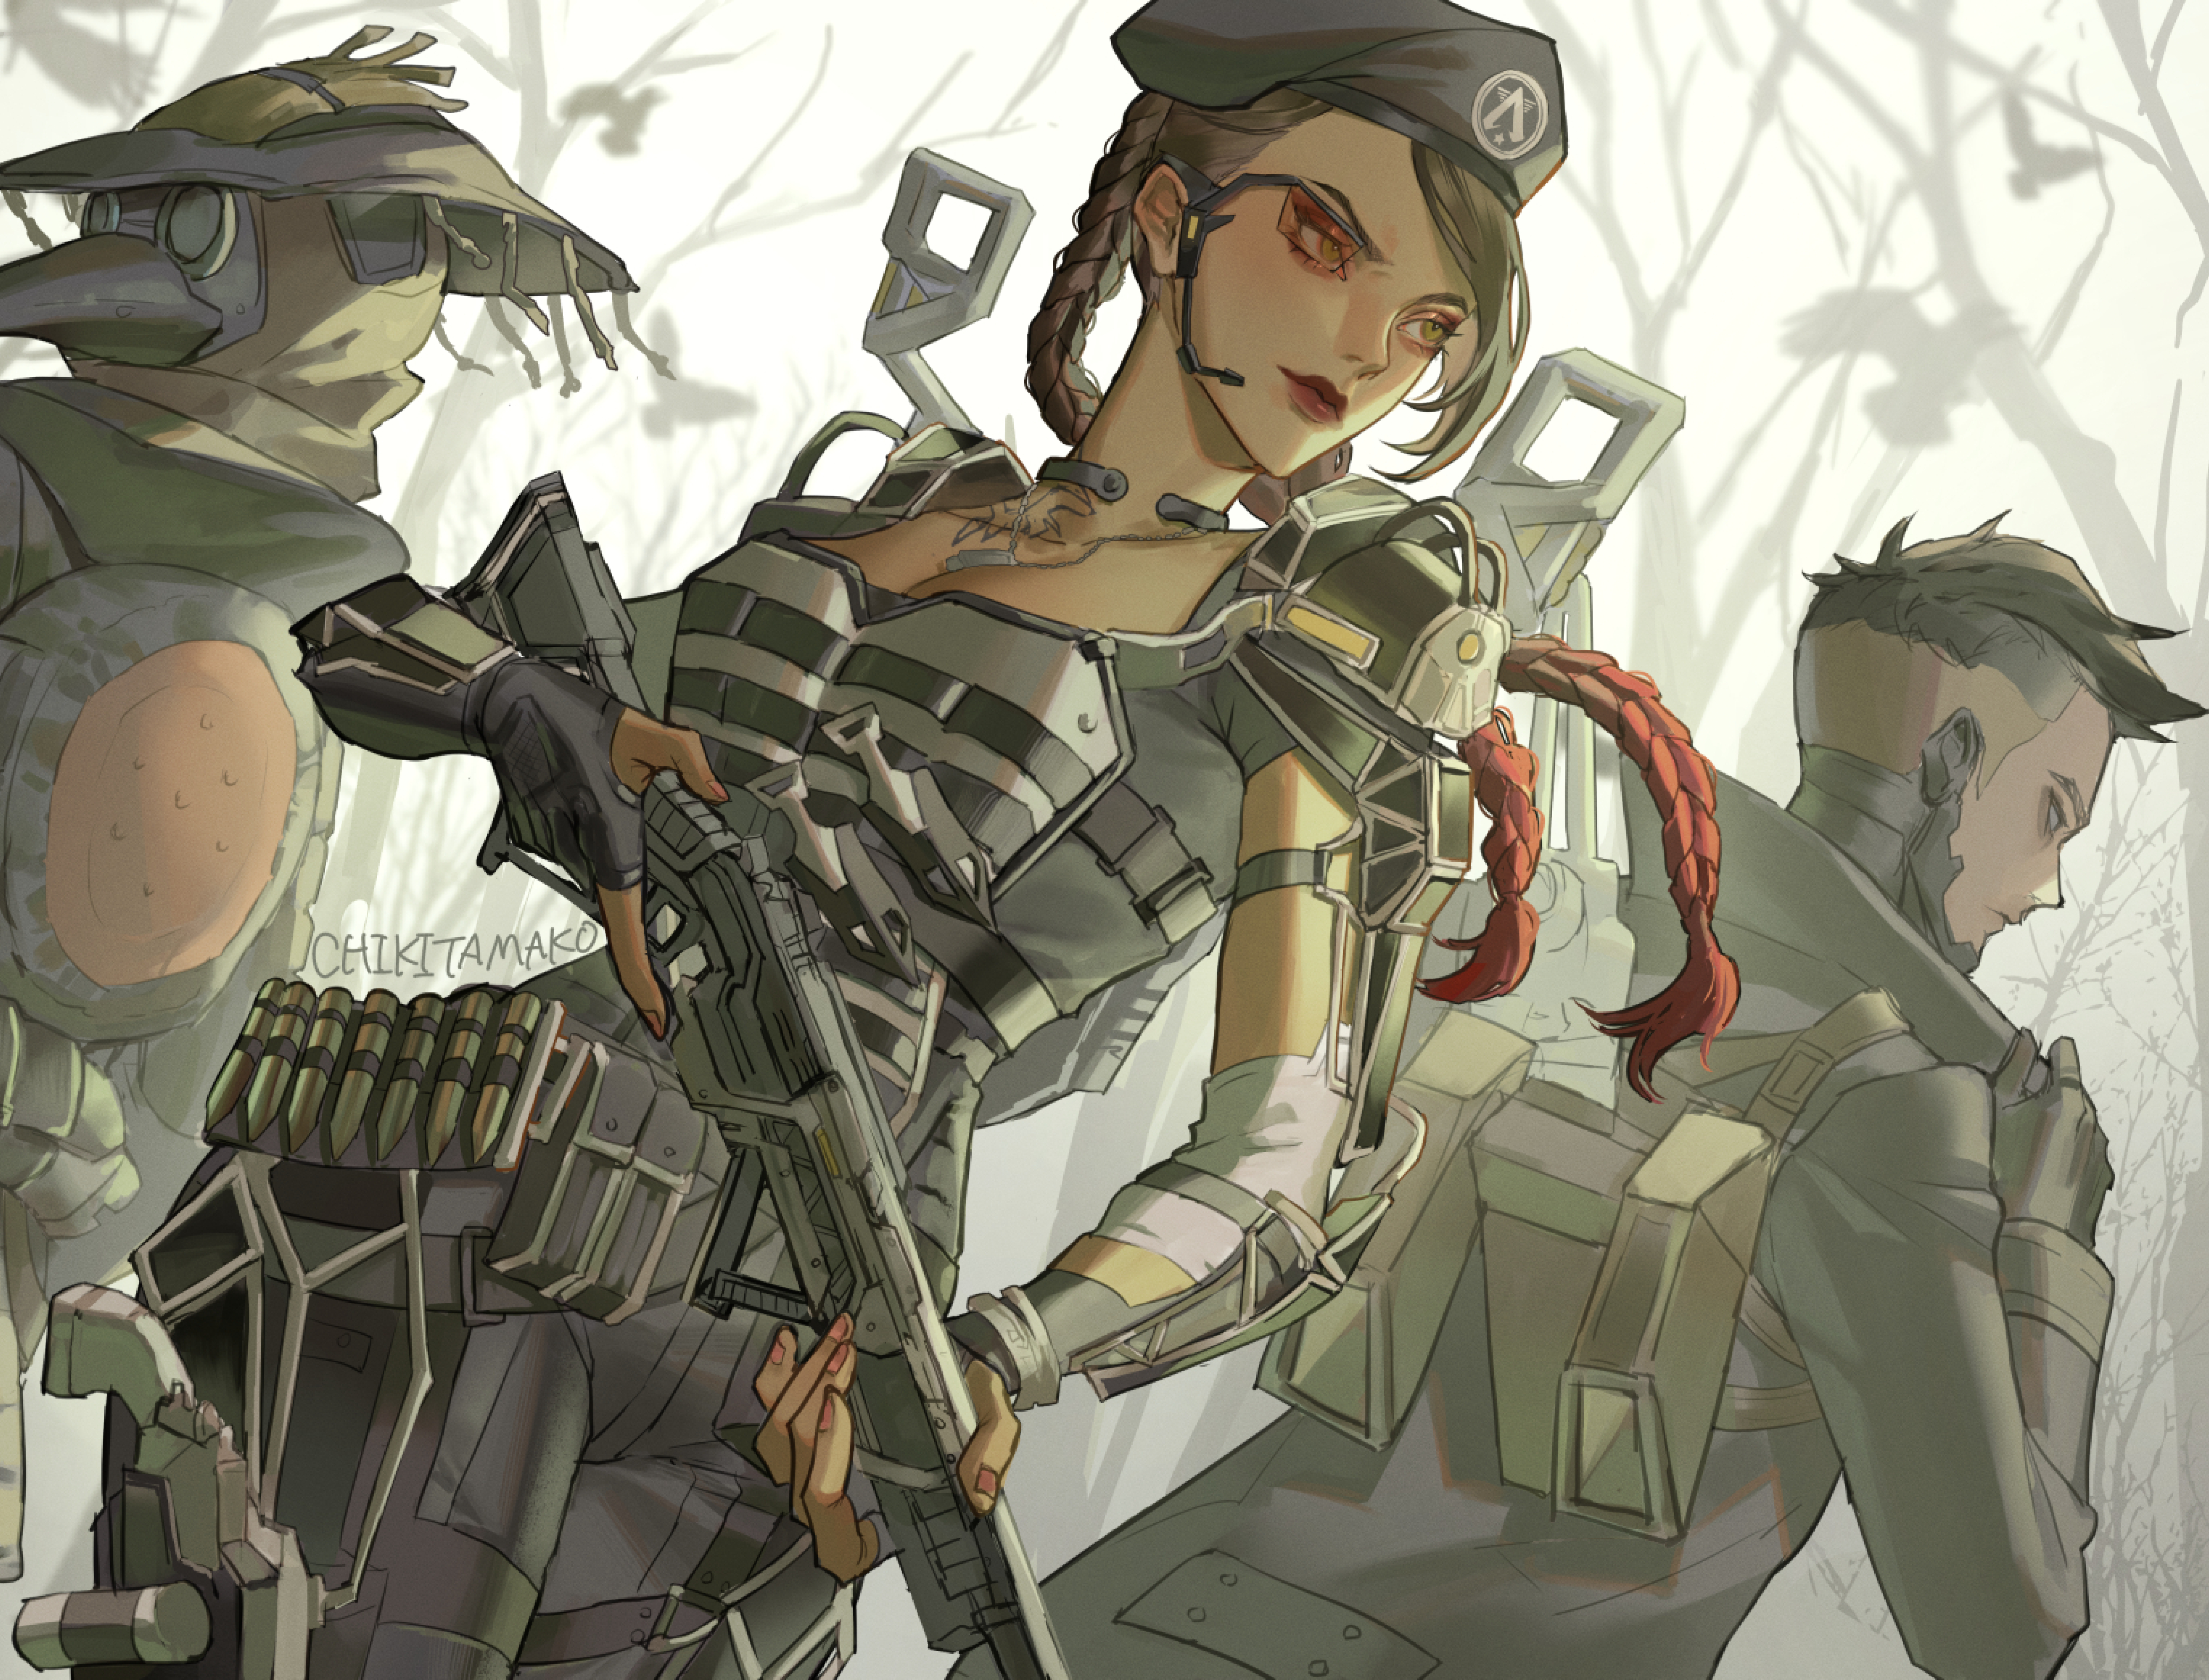 Apex Legends: Top 10 Best Legendary Character Skins - Esports Illustrated